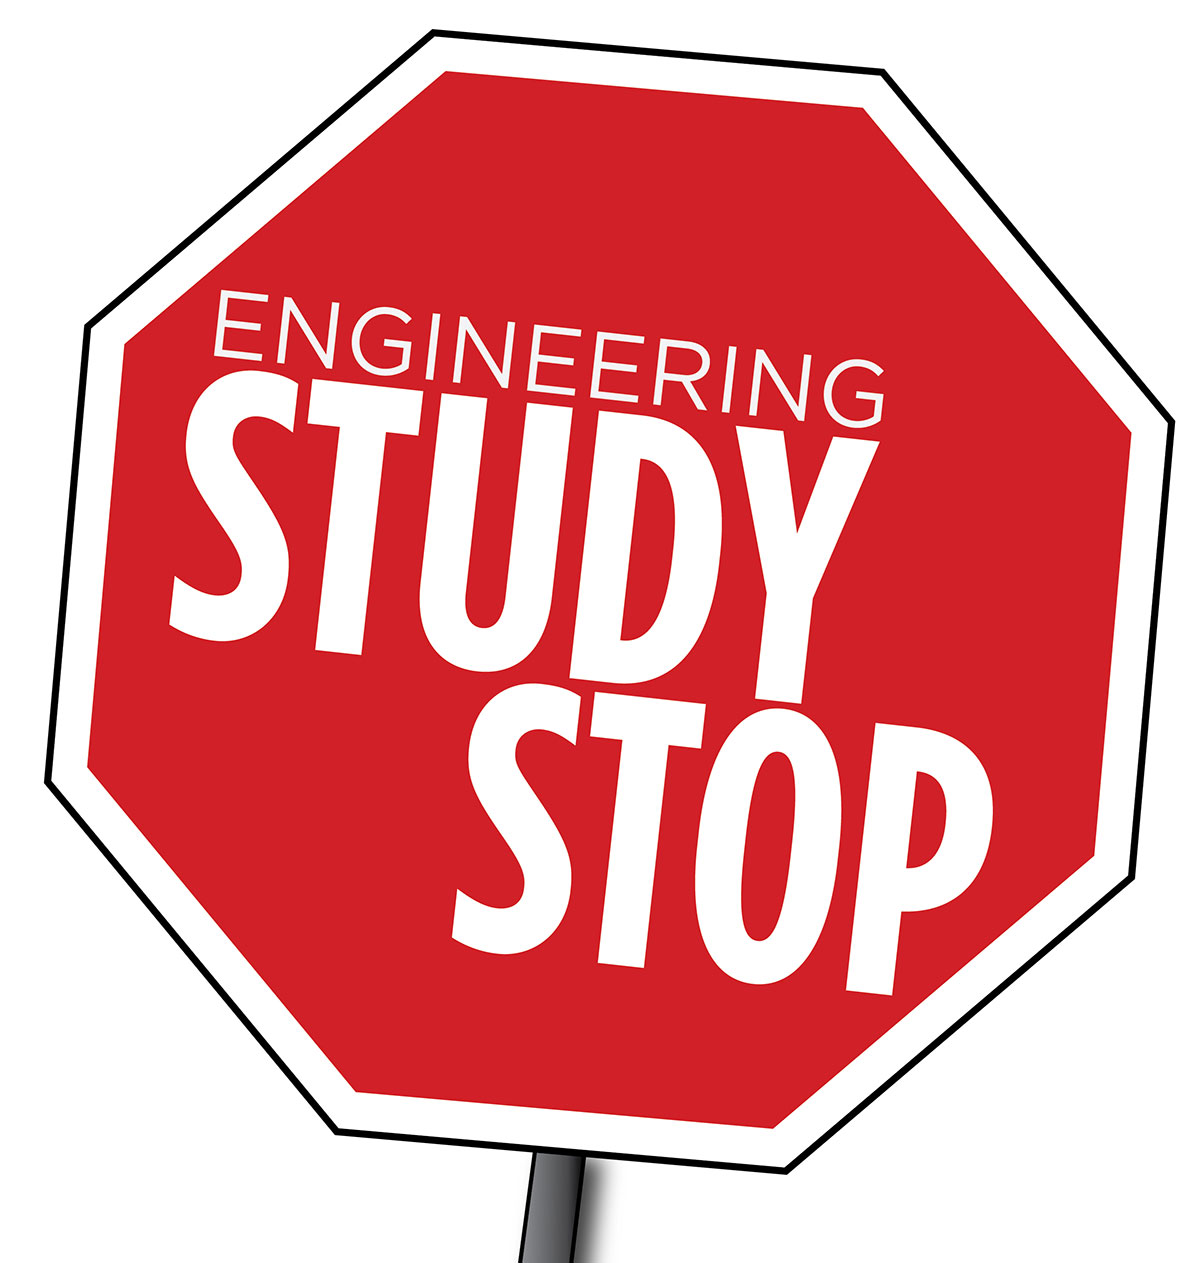 Engineering Study Stops on City and Scott campuses will not be open during Finals Week.